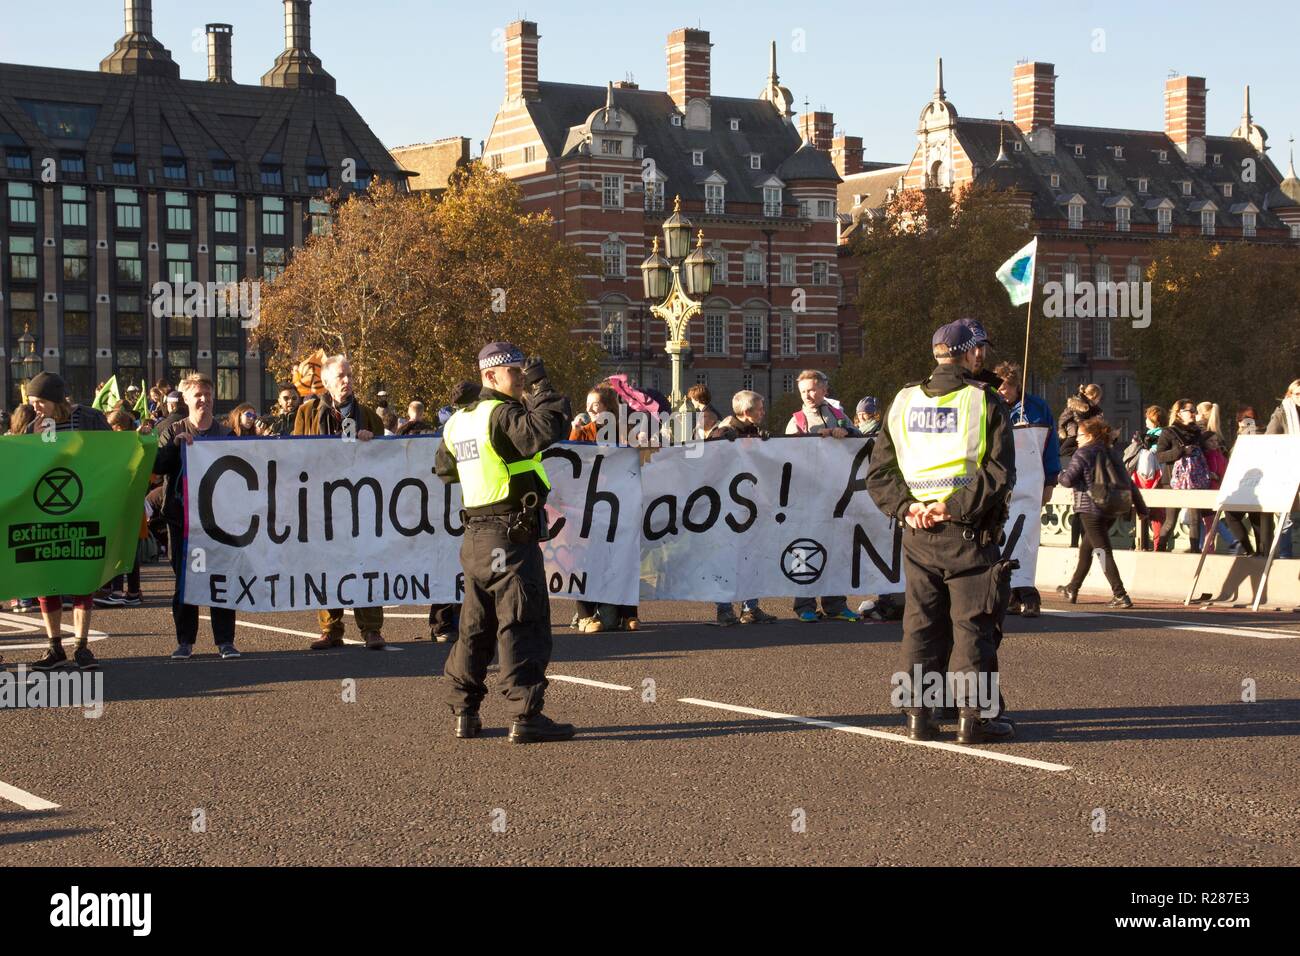 London, UK. 17th November 2018. Extinction Rebellion occupy Westminster Bridge in protest over climate change. Credit: Dimple Patel/Alamy Live News Stock Photo